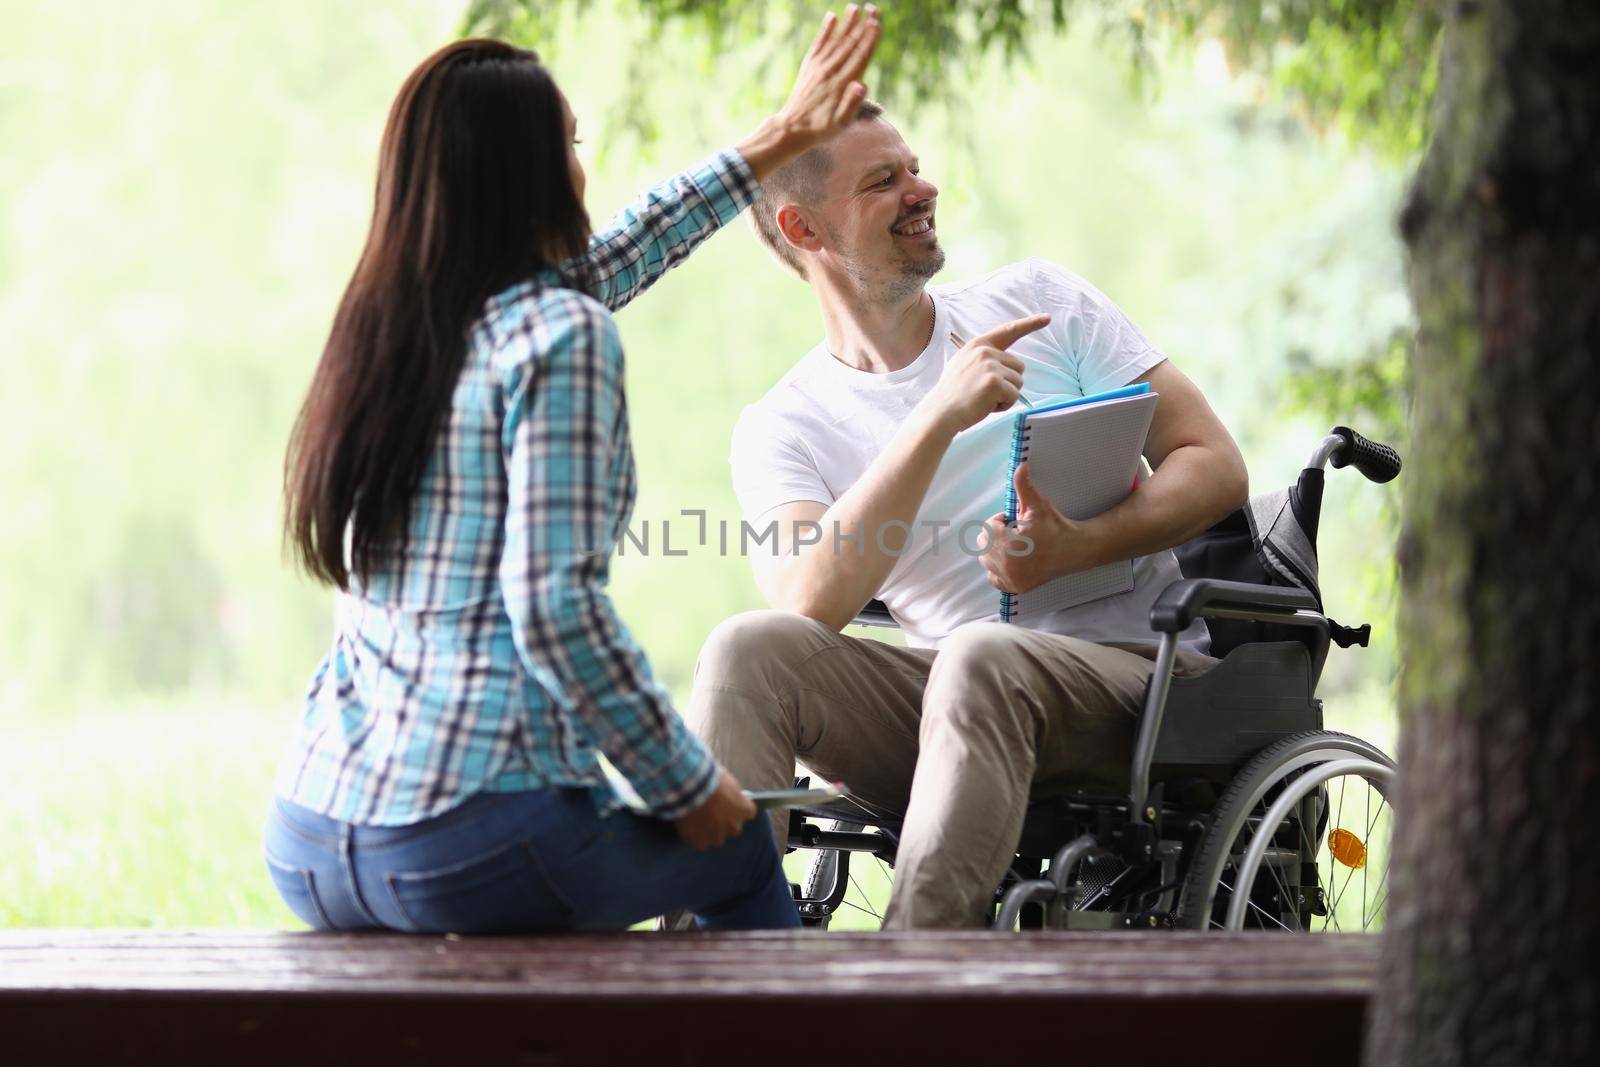 Woman and man in wheelchair wave hello to someone, people study in park by kuprevich